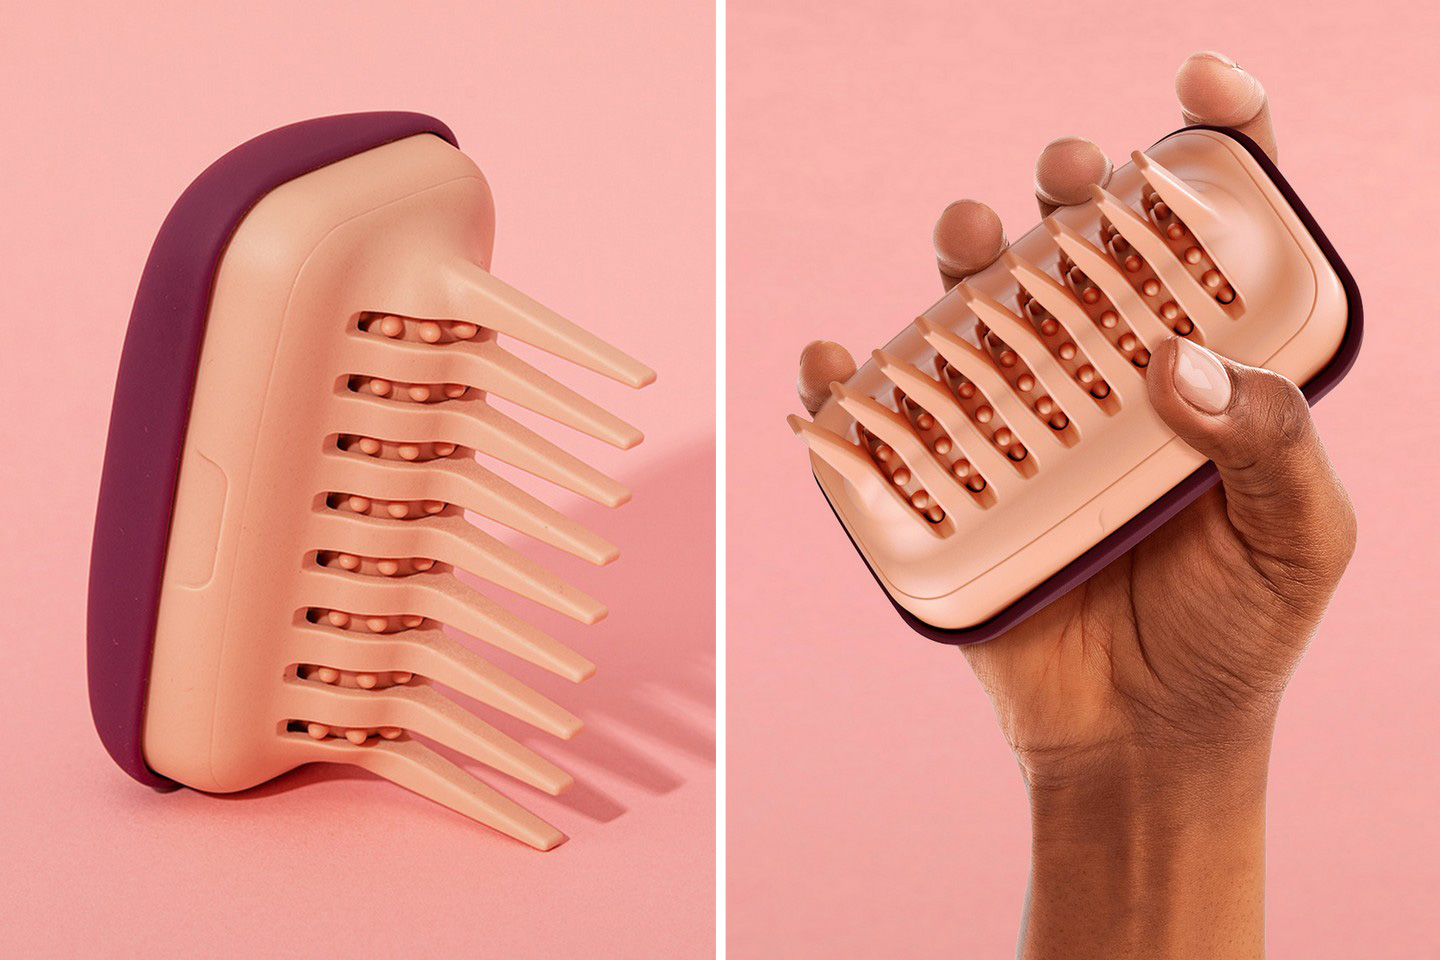 This ‘rolling hairbrush’ helps detangle extremely frizzy hair while also evenly applying haircare products